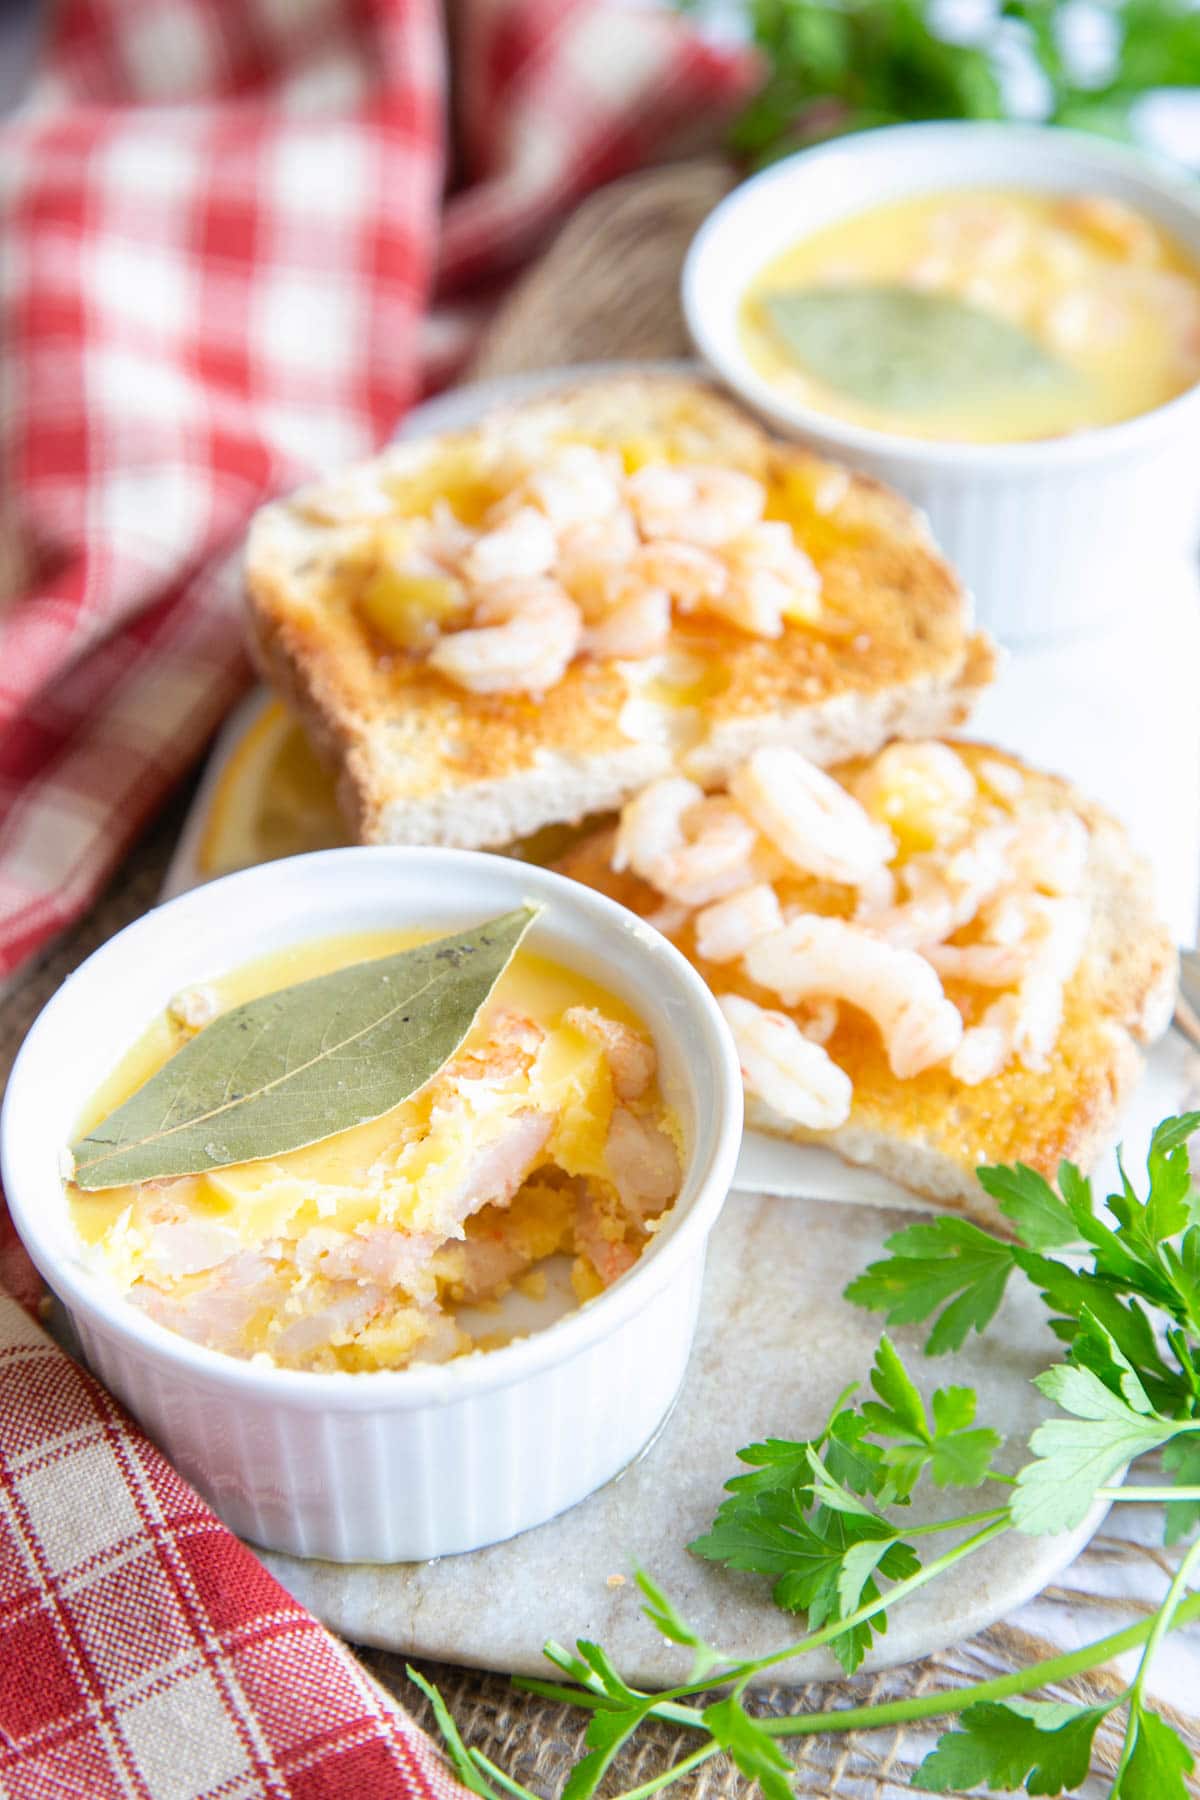 Vibrant and delicious spread on sourdough toast, these potted shrimps are just so tempting. A squeeze of lemon is all they need.